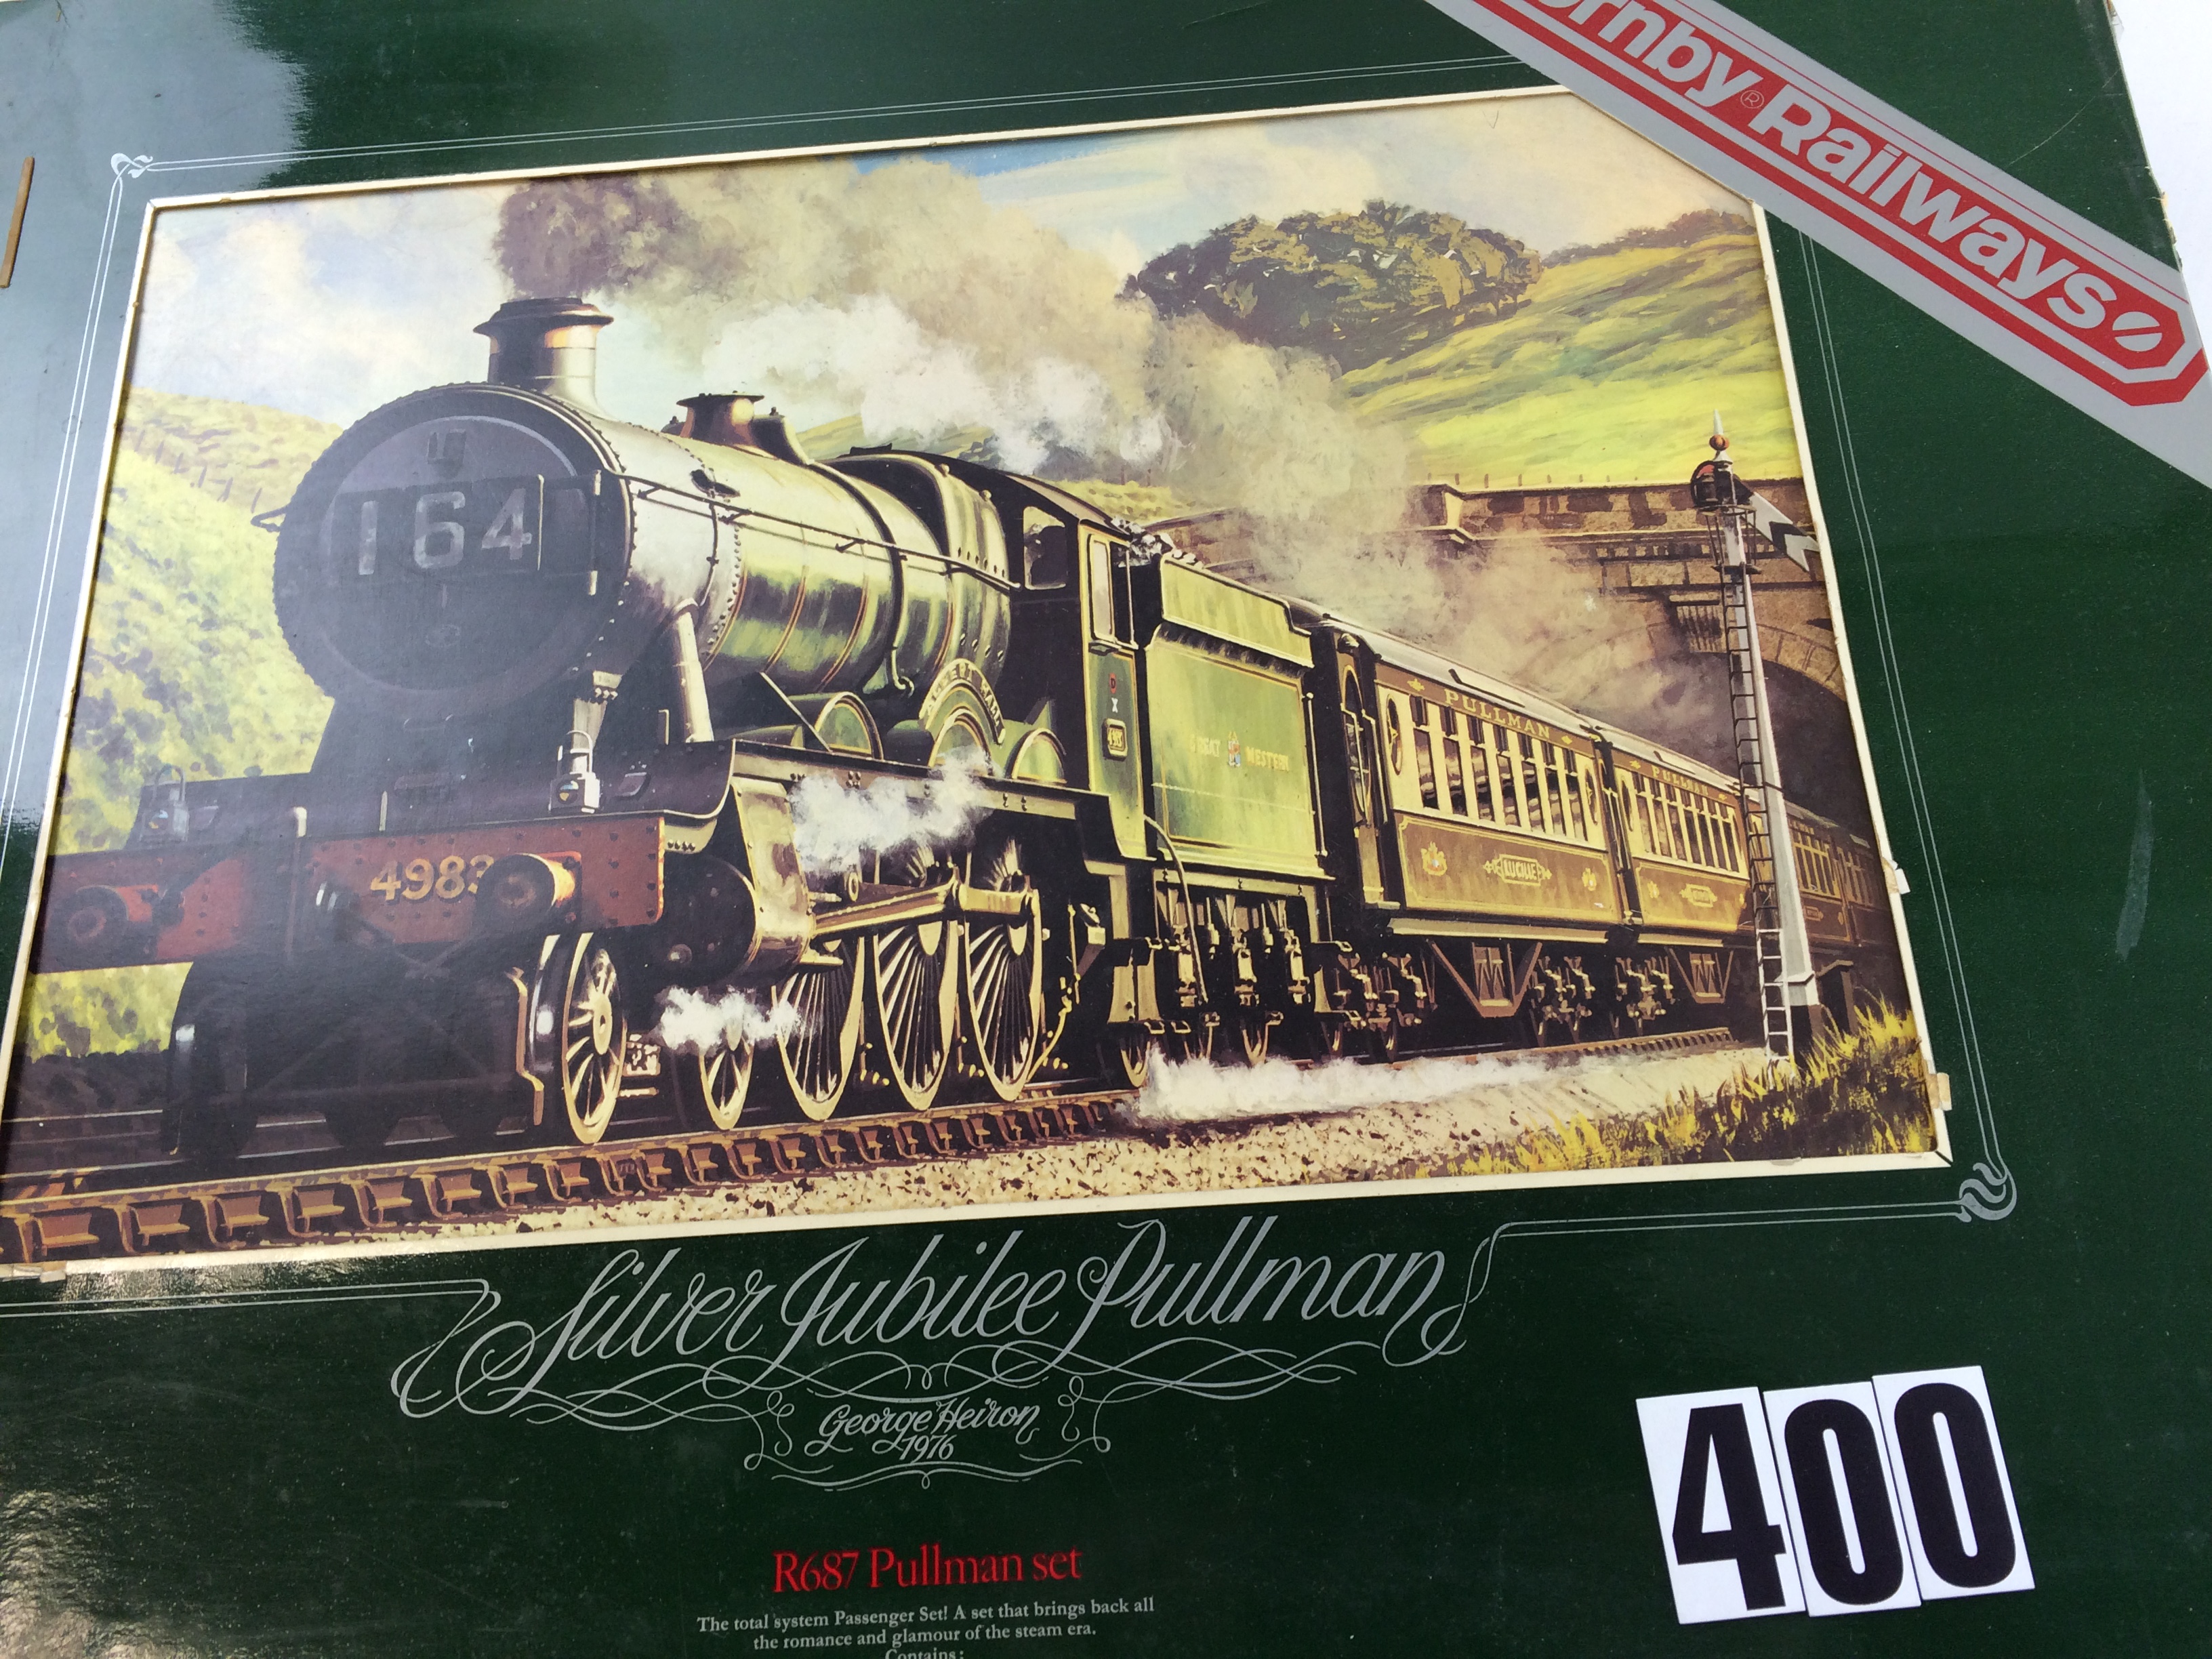 Hornby OO Gauge 'Silver Jubilee' Train sets: issued for the Queen's Jubilee in 1977, and